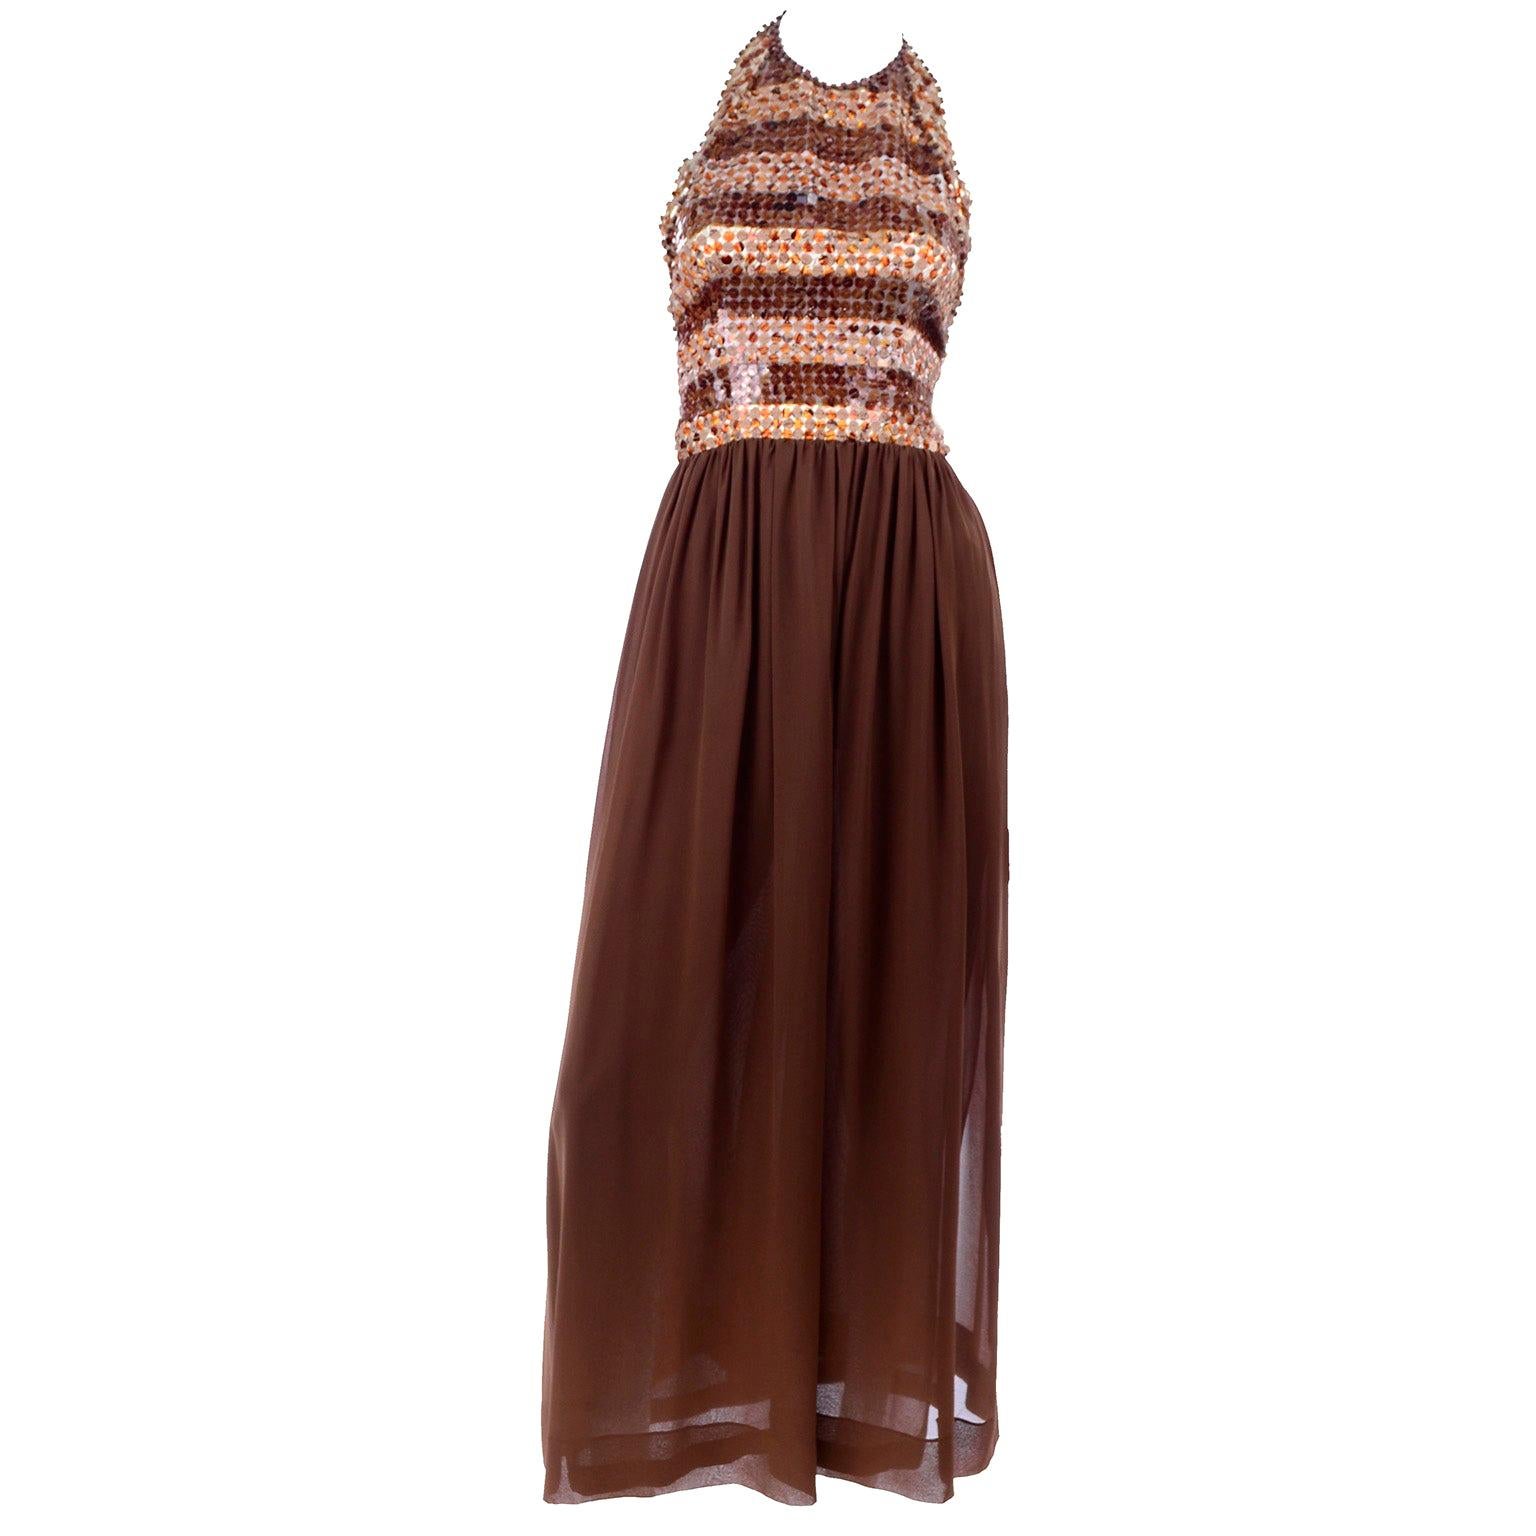 1996 Givenchy Vintage Chocolate Brown Silk Halter Beaded Evening Dress